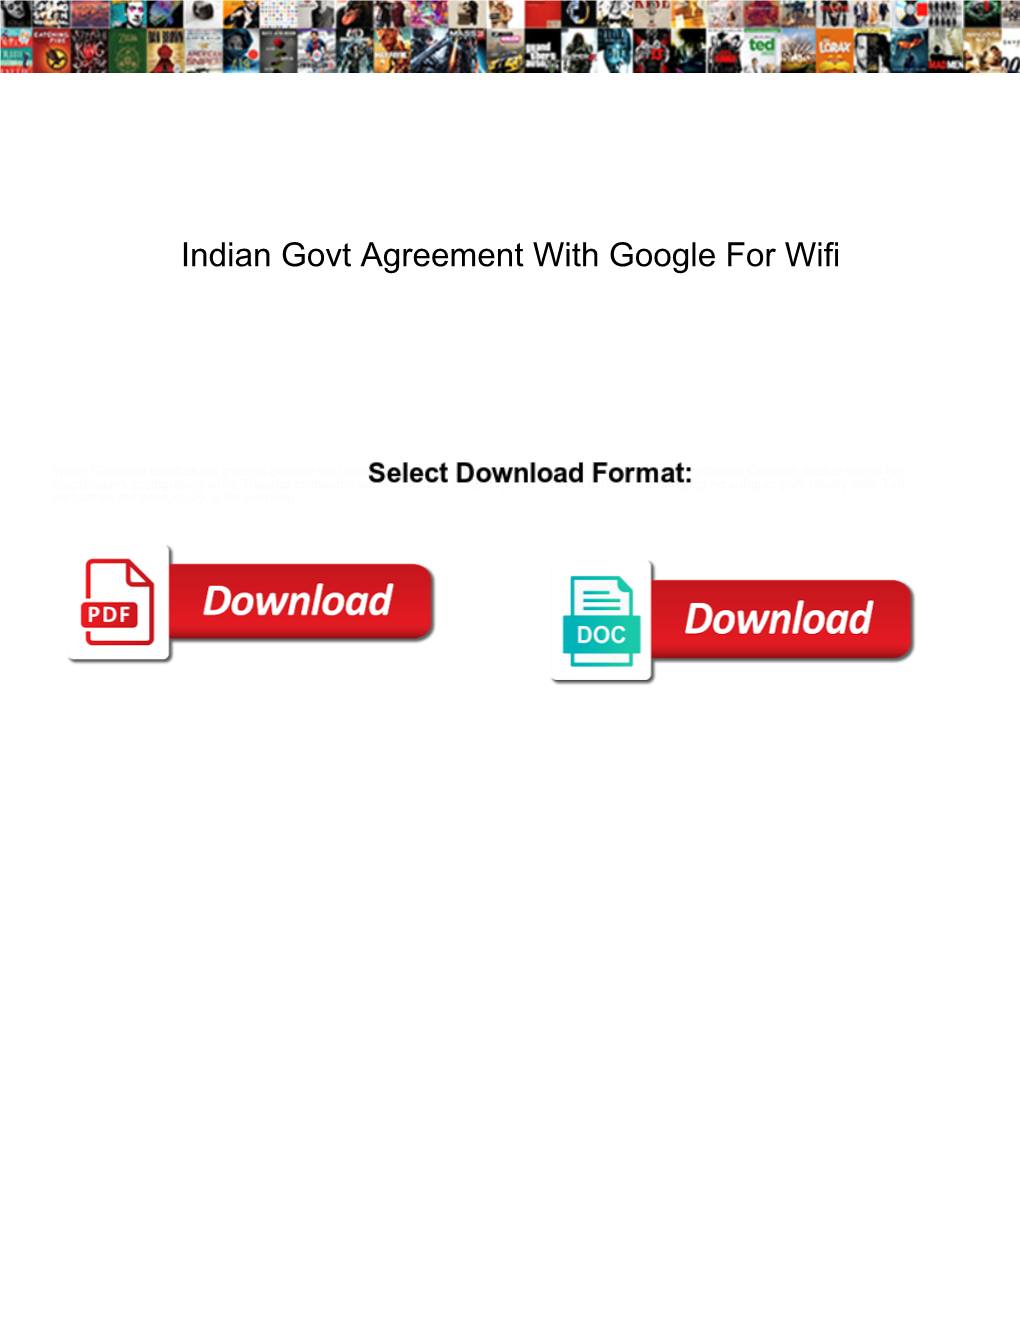 Indian Govt Agreement with Google for Wifi